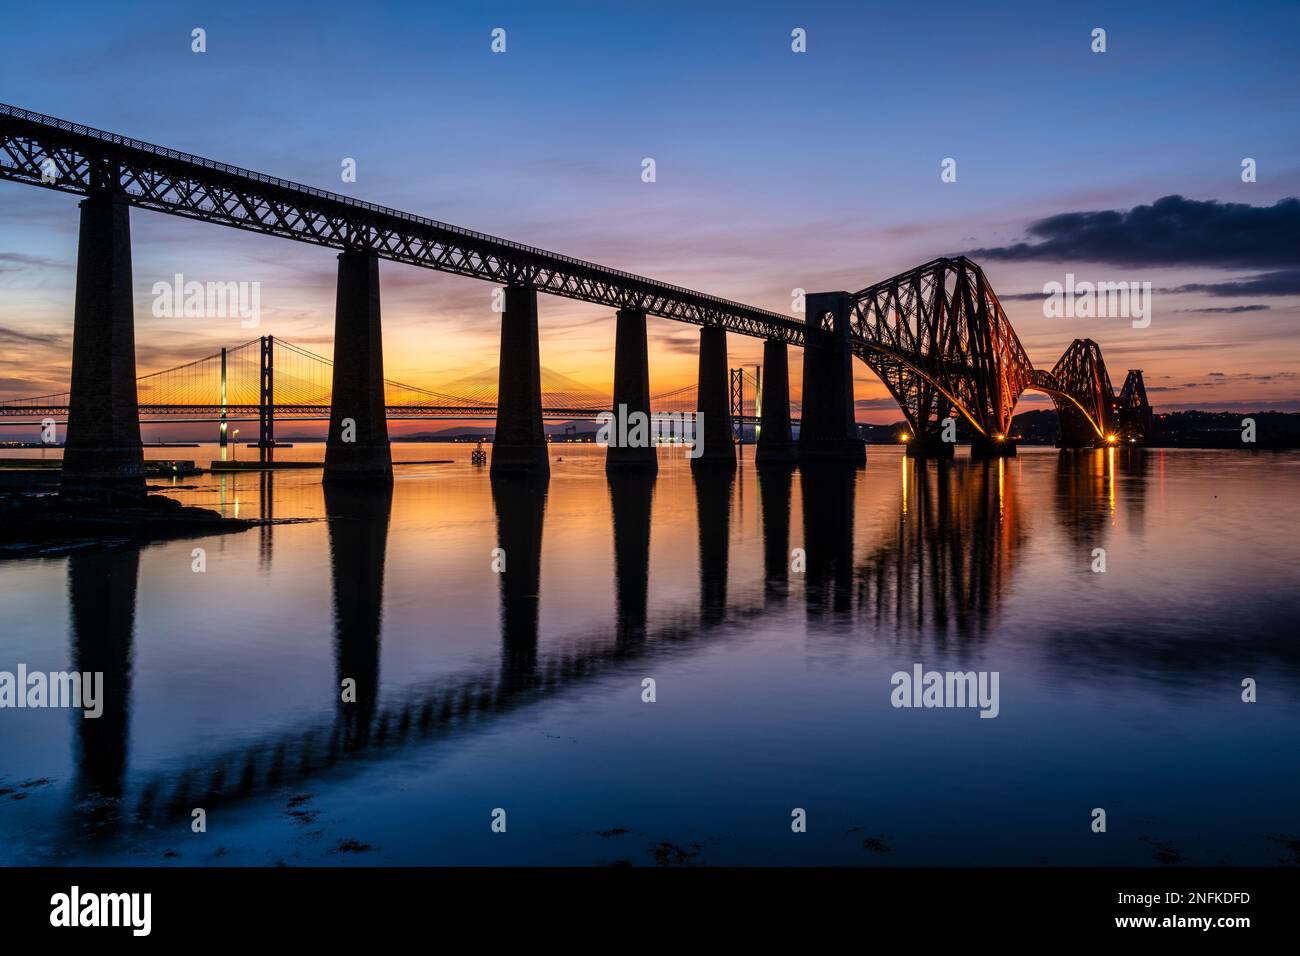 Illuminated Forth Rail Bridge at dusk, with Forth Road Bridge and Queensferry Crossing beyond, from South Queensferry, Scotland, UK Stock Photo